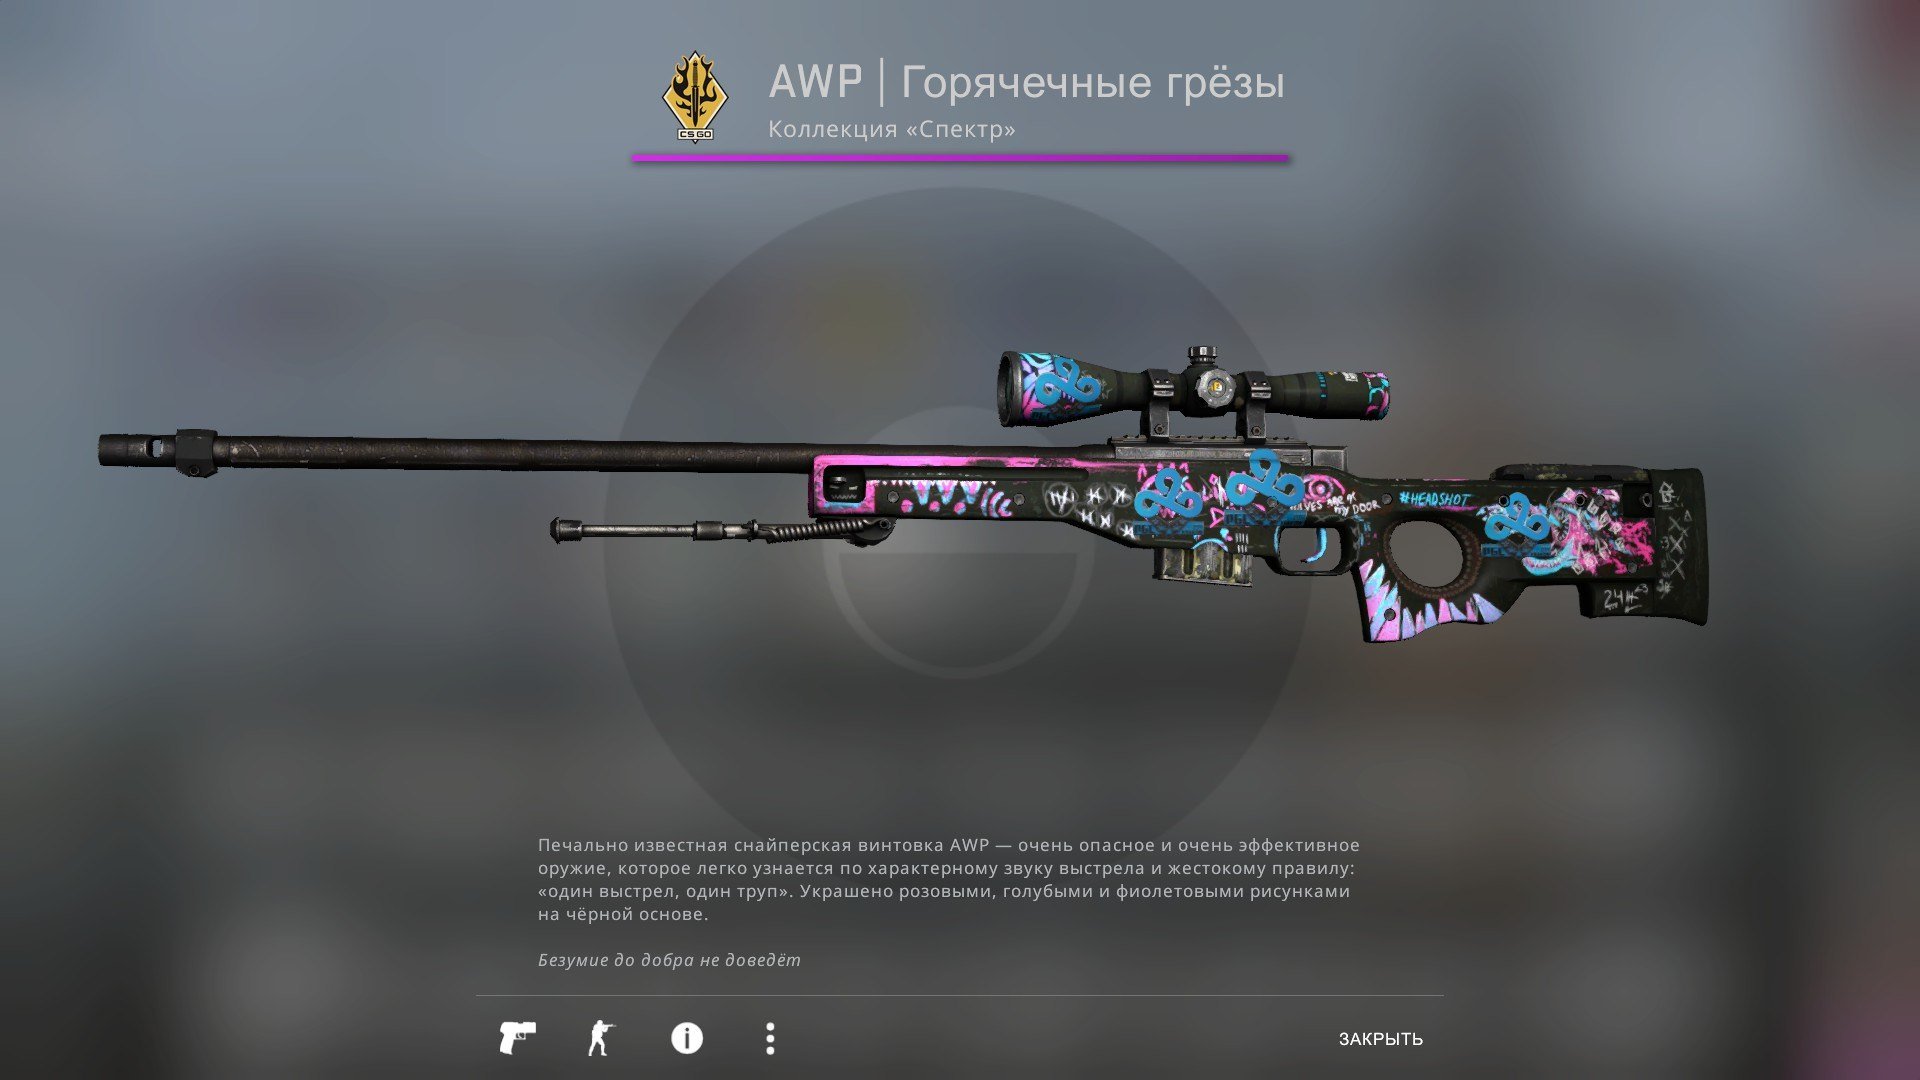 Awp cannons карта мастерская фото 88